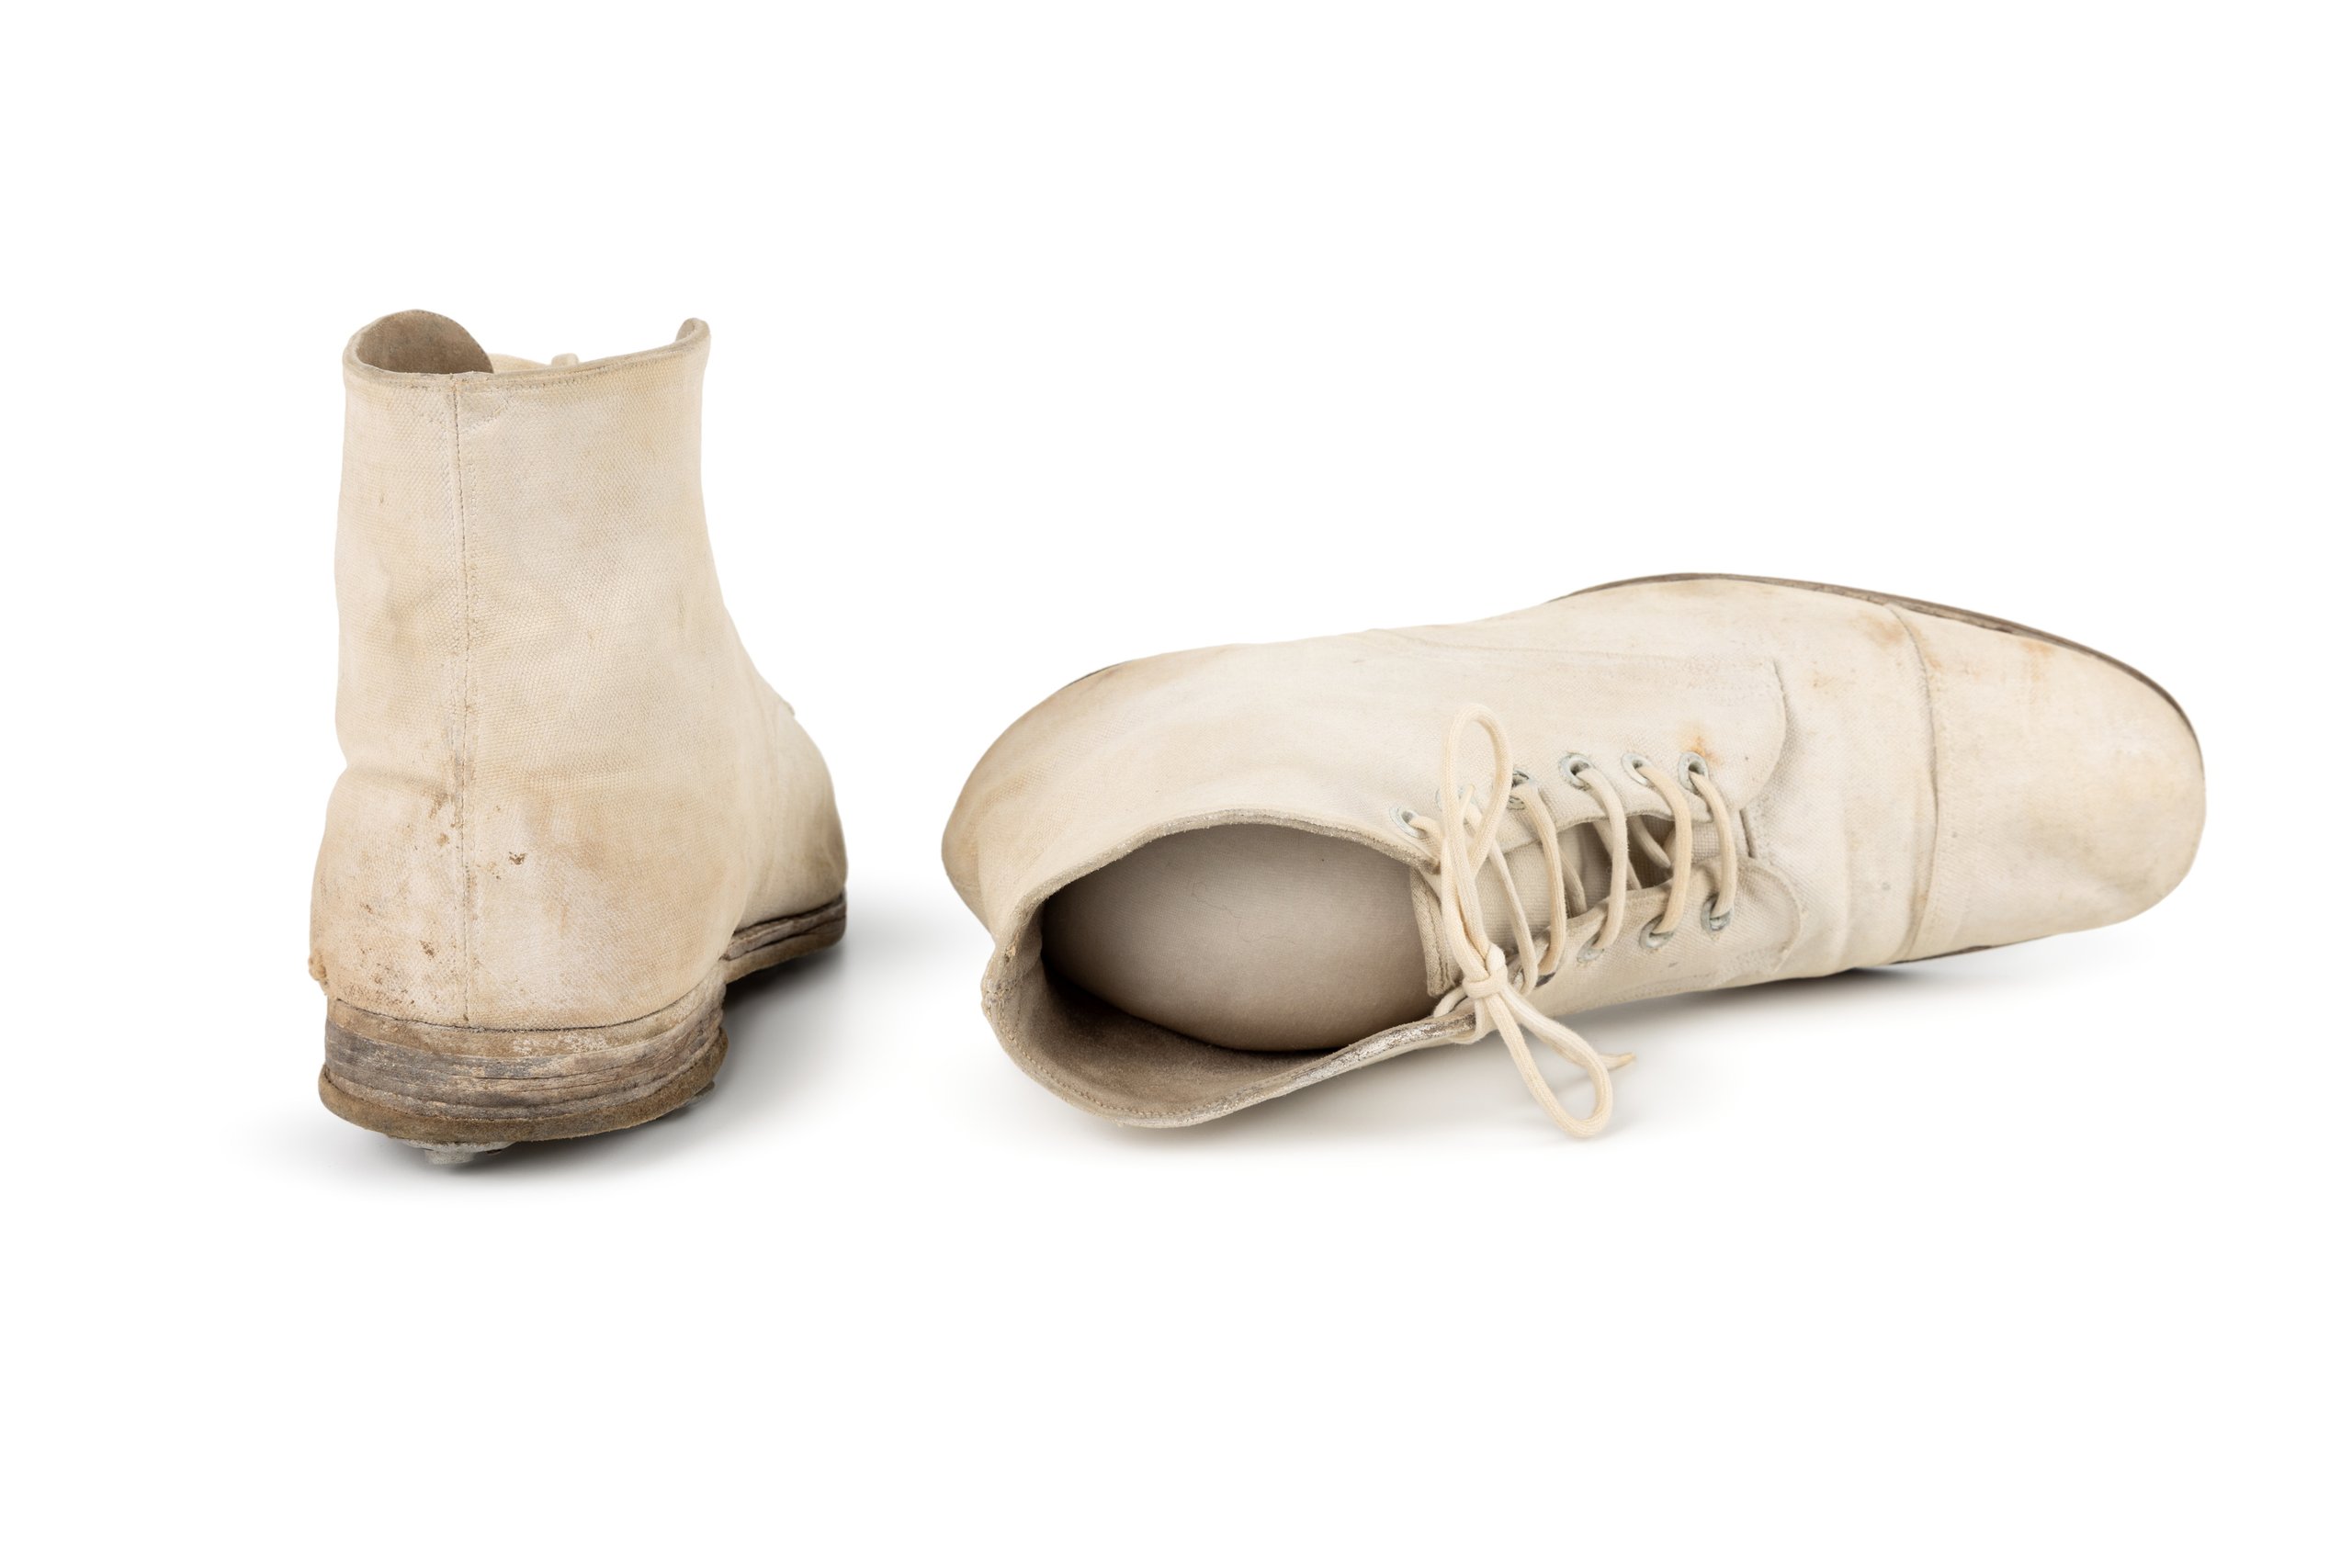 Pair of woodchoppers boots worn by Tom Kirk